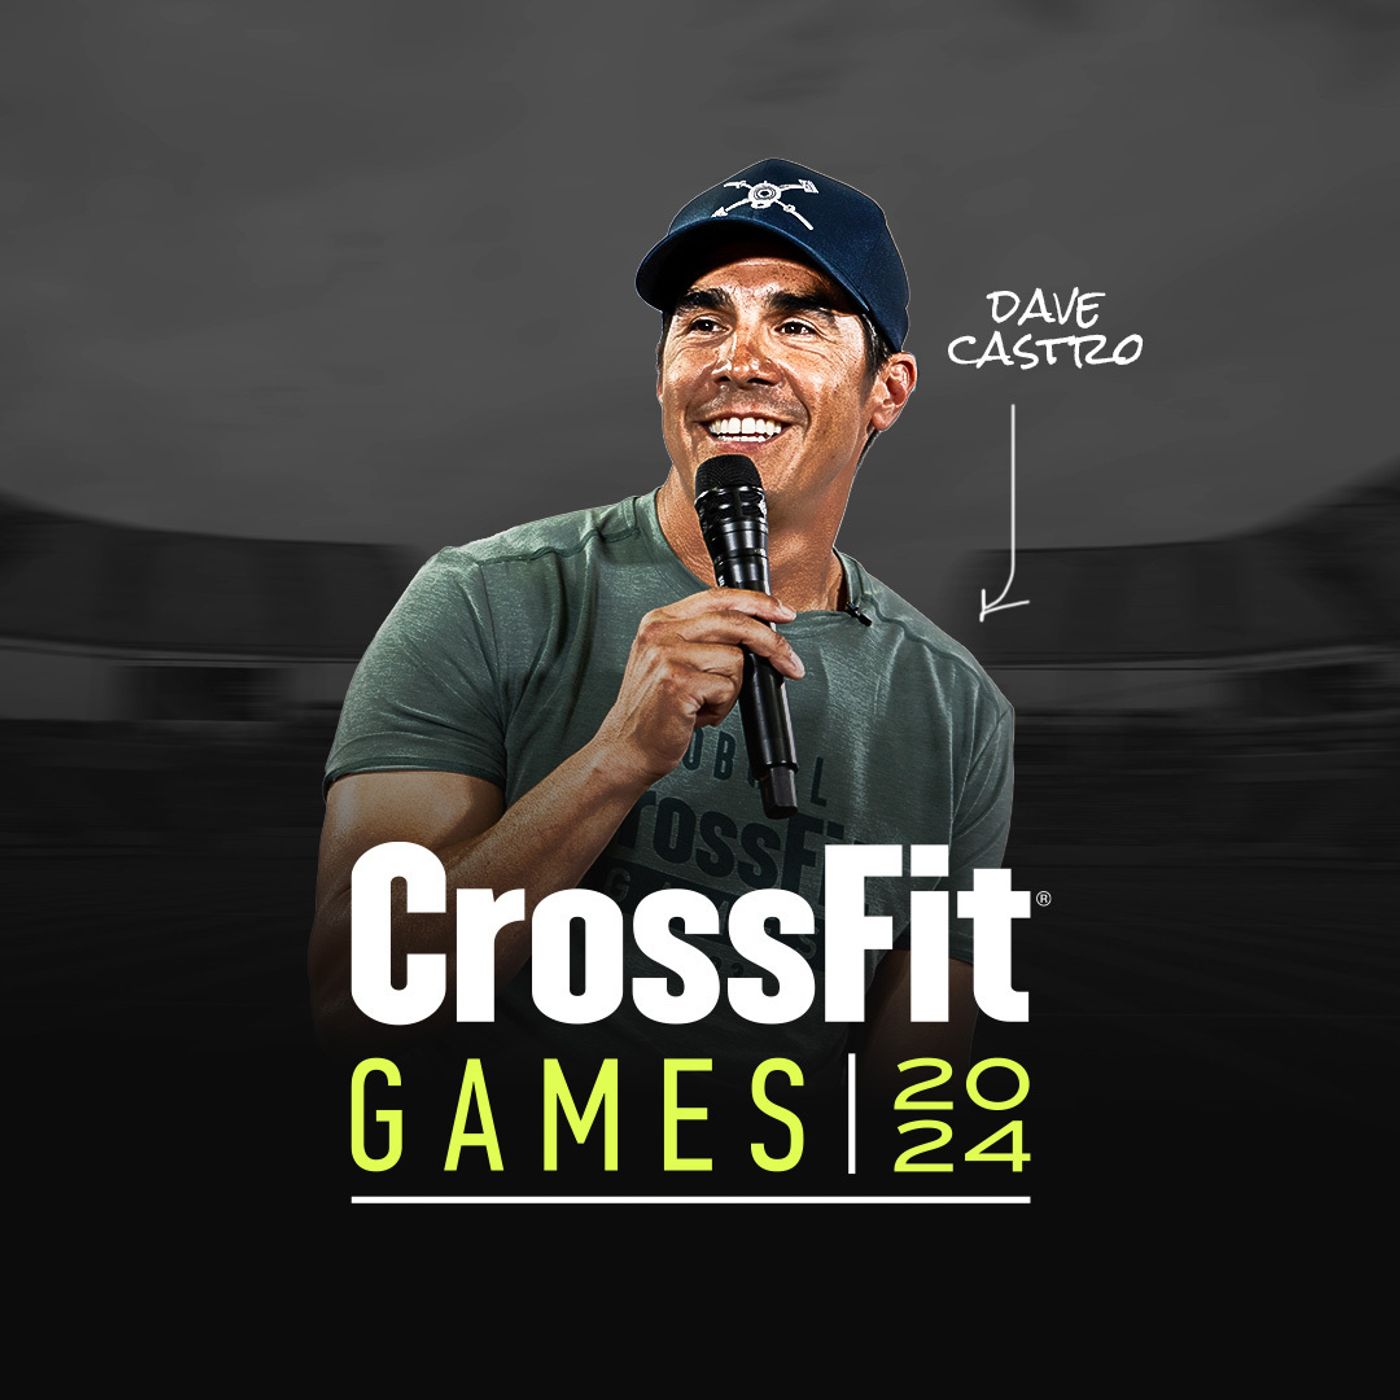 CrossFit Games Podcast